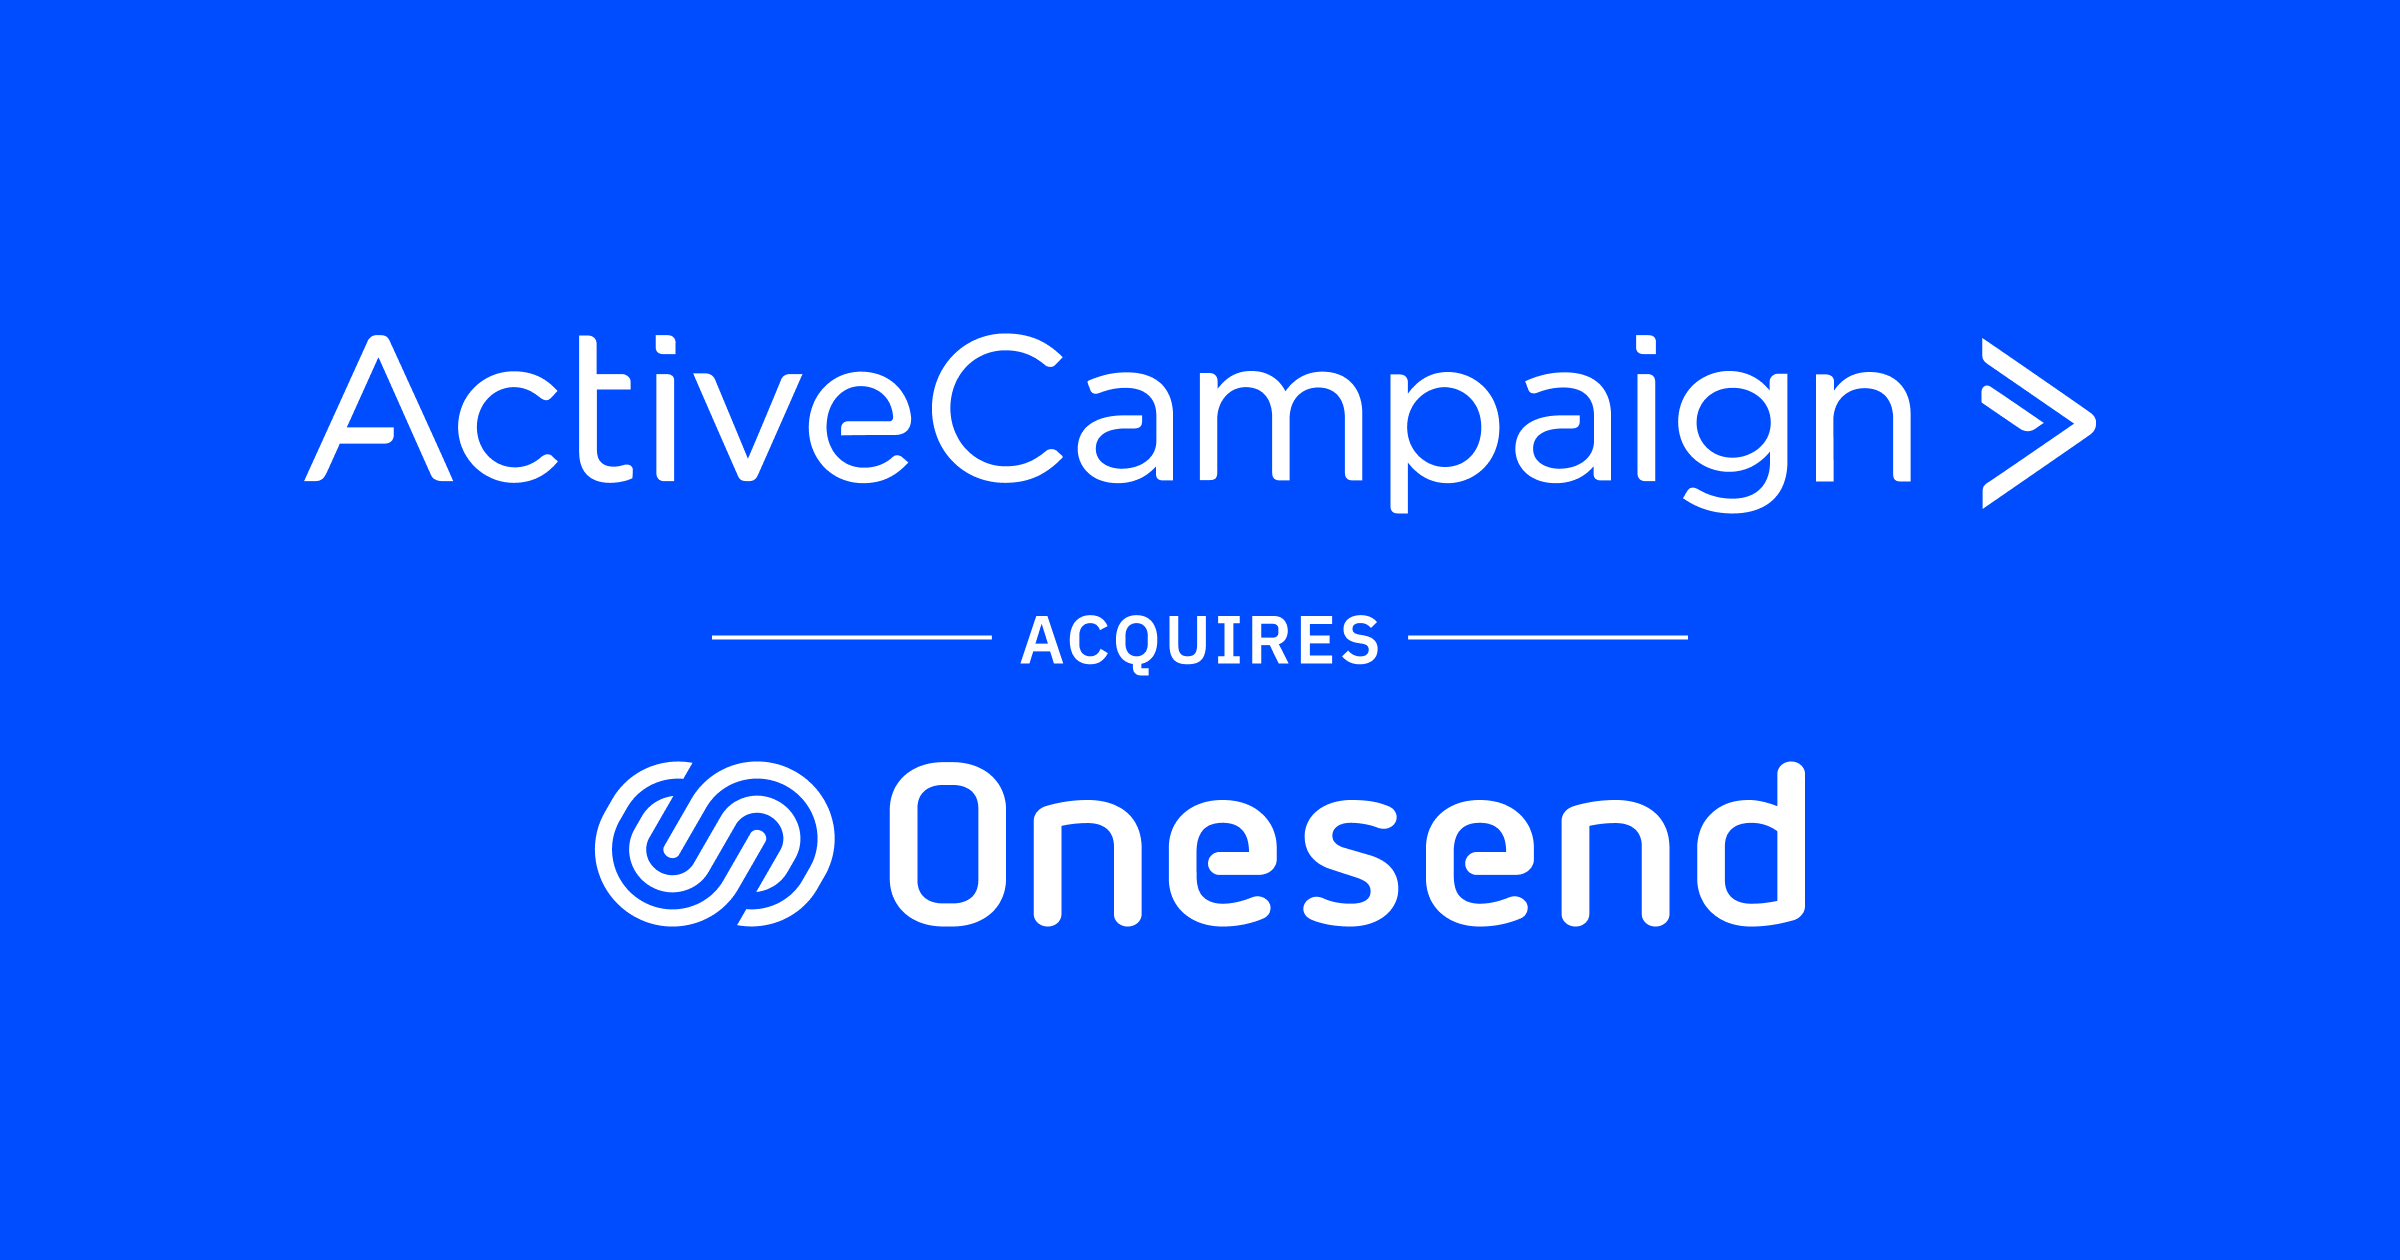 ActiveCampaign Acquires Onesend—The Best of All Tools in One Platform for Franchise, Multi-location Brands, and Resellers